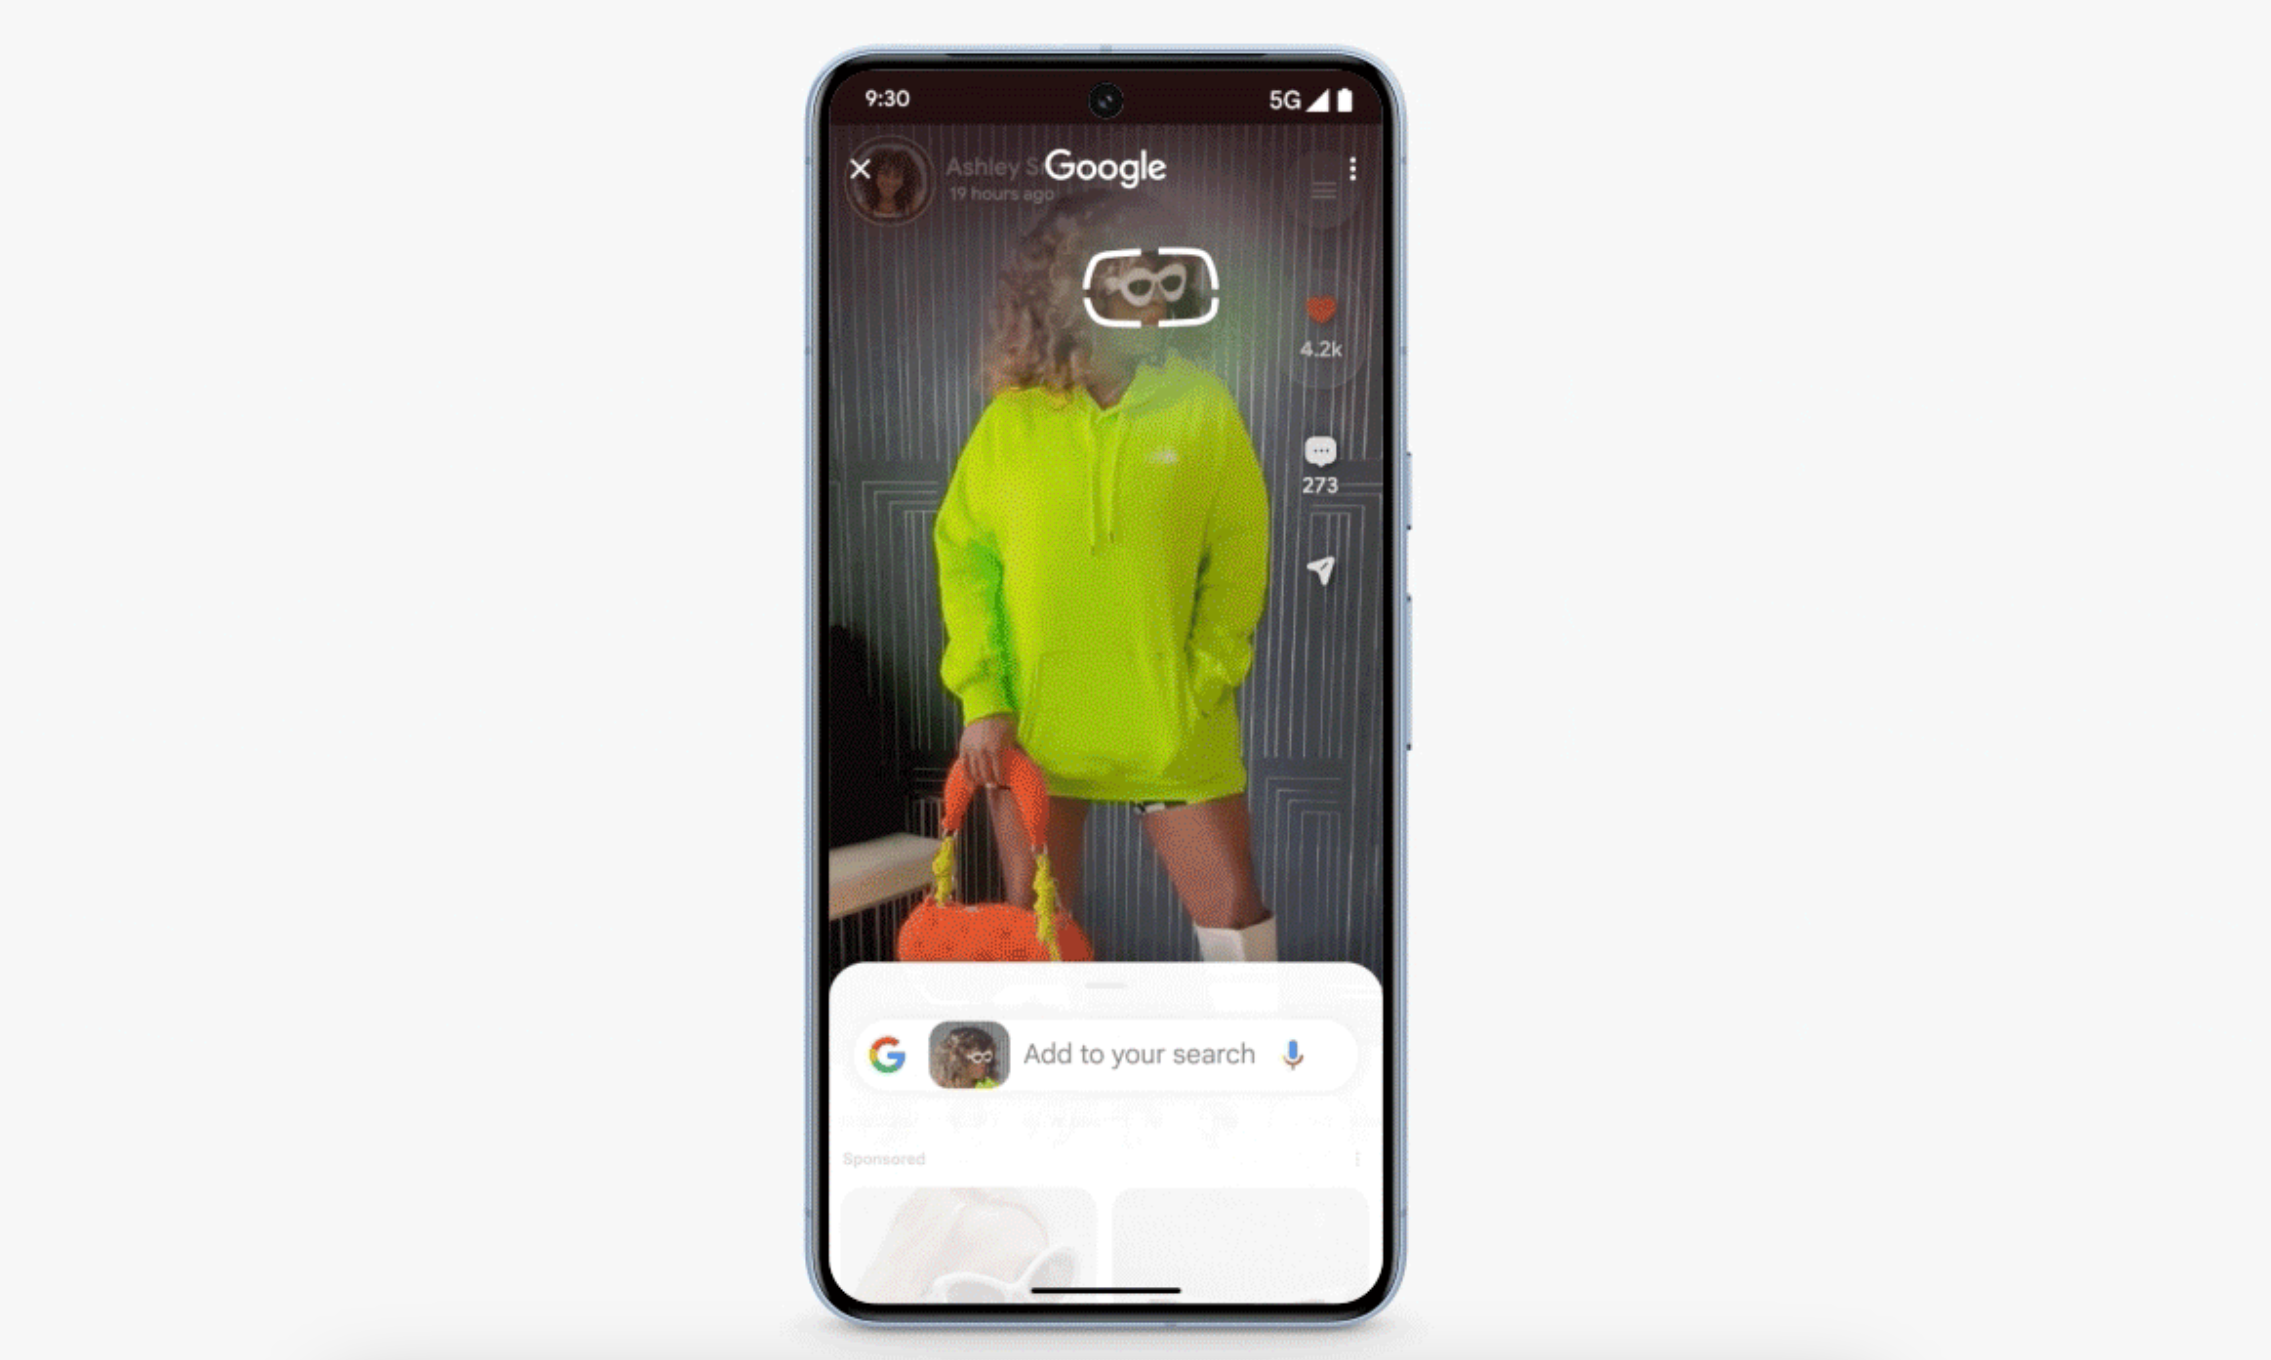 Image credit – Google – Pixel phones are in for a treat: January feature drop brings Circle to Search, Magic Compose and more